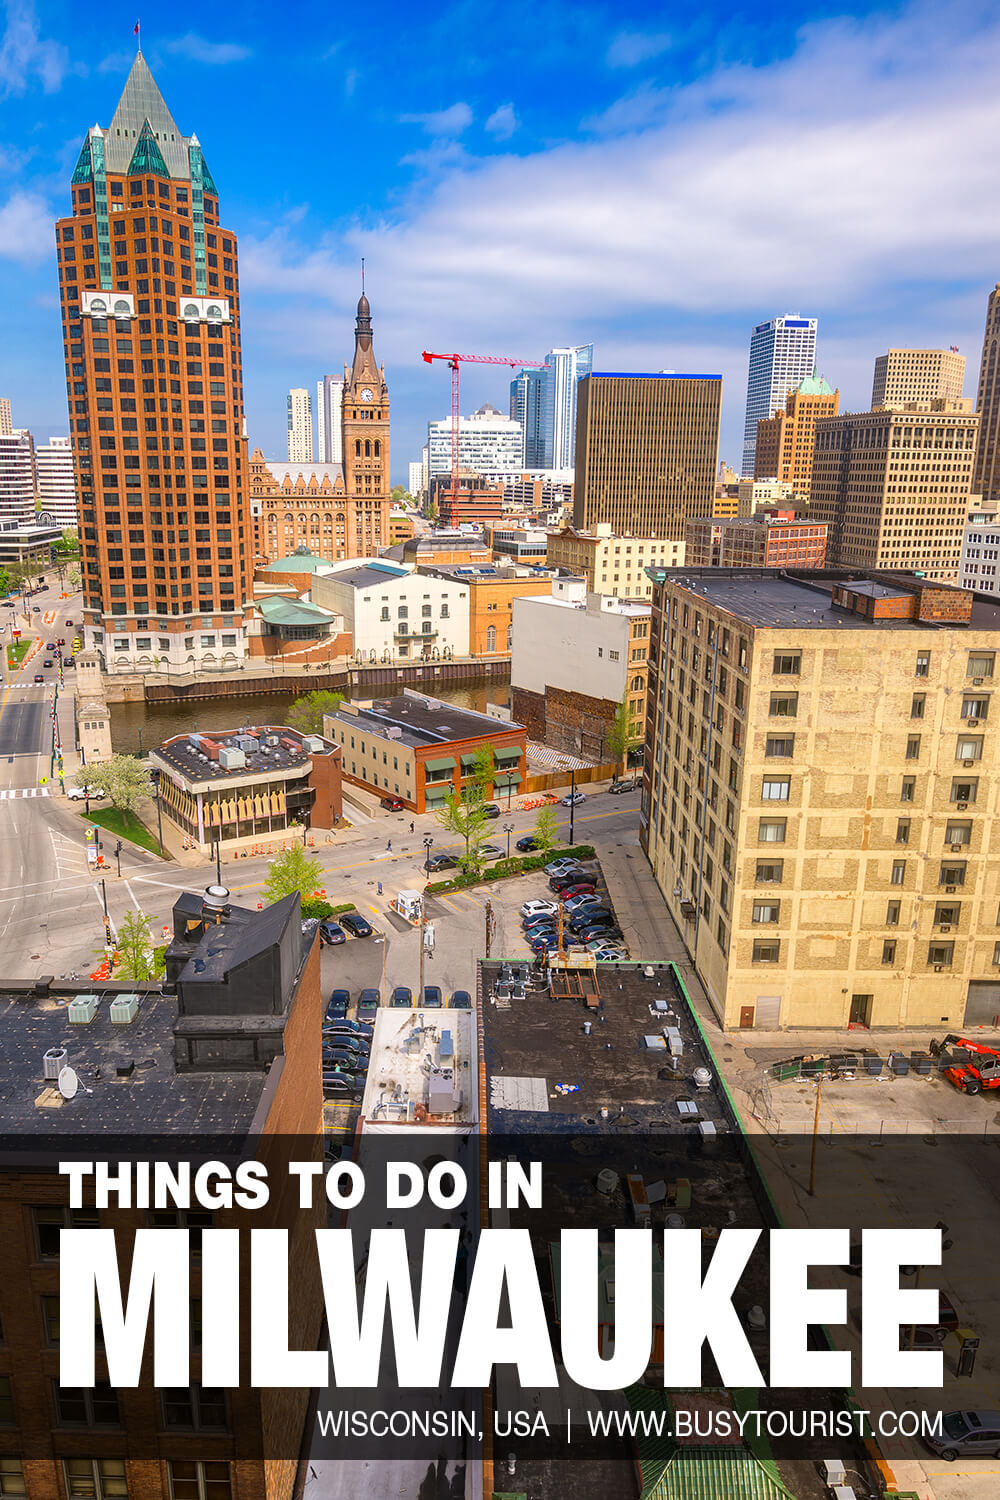 27 Fun Things To Do In Milwaukee (Wi) Attractions & Activities